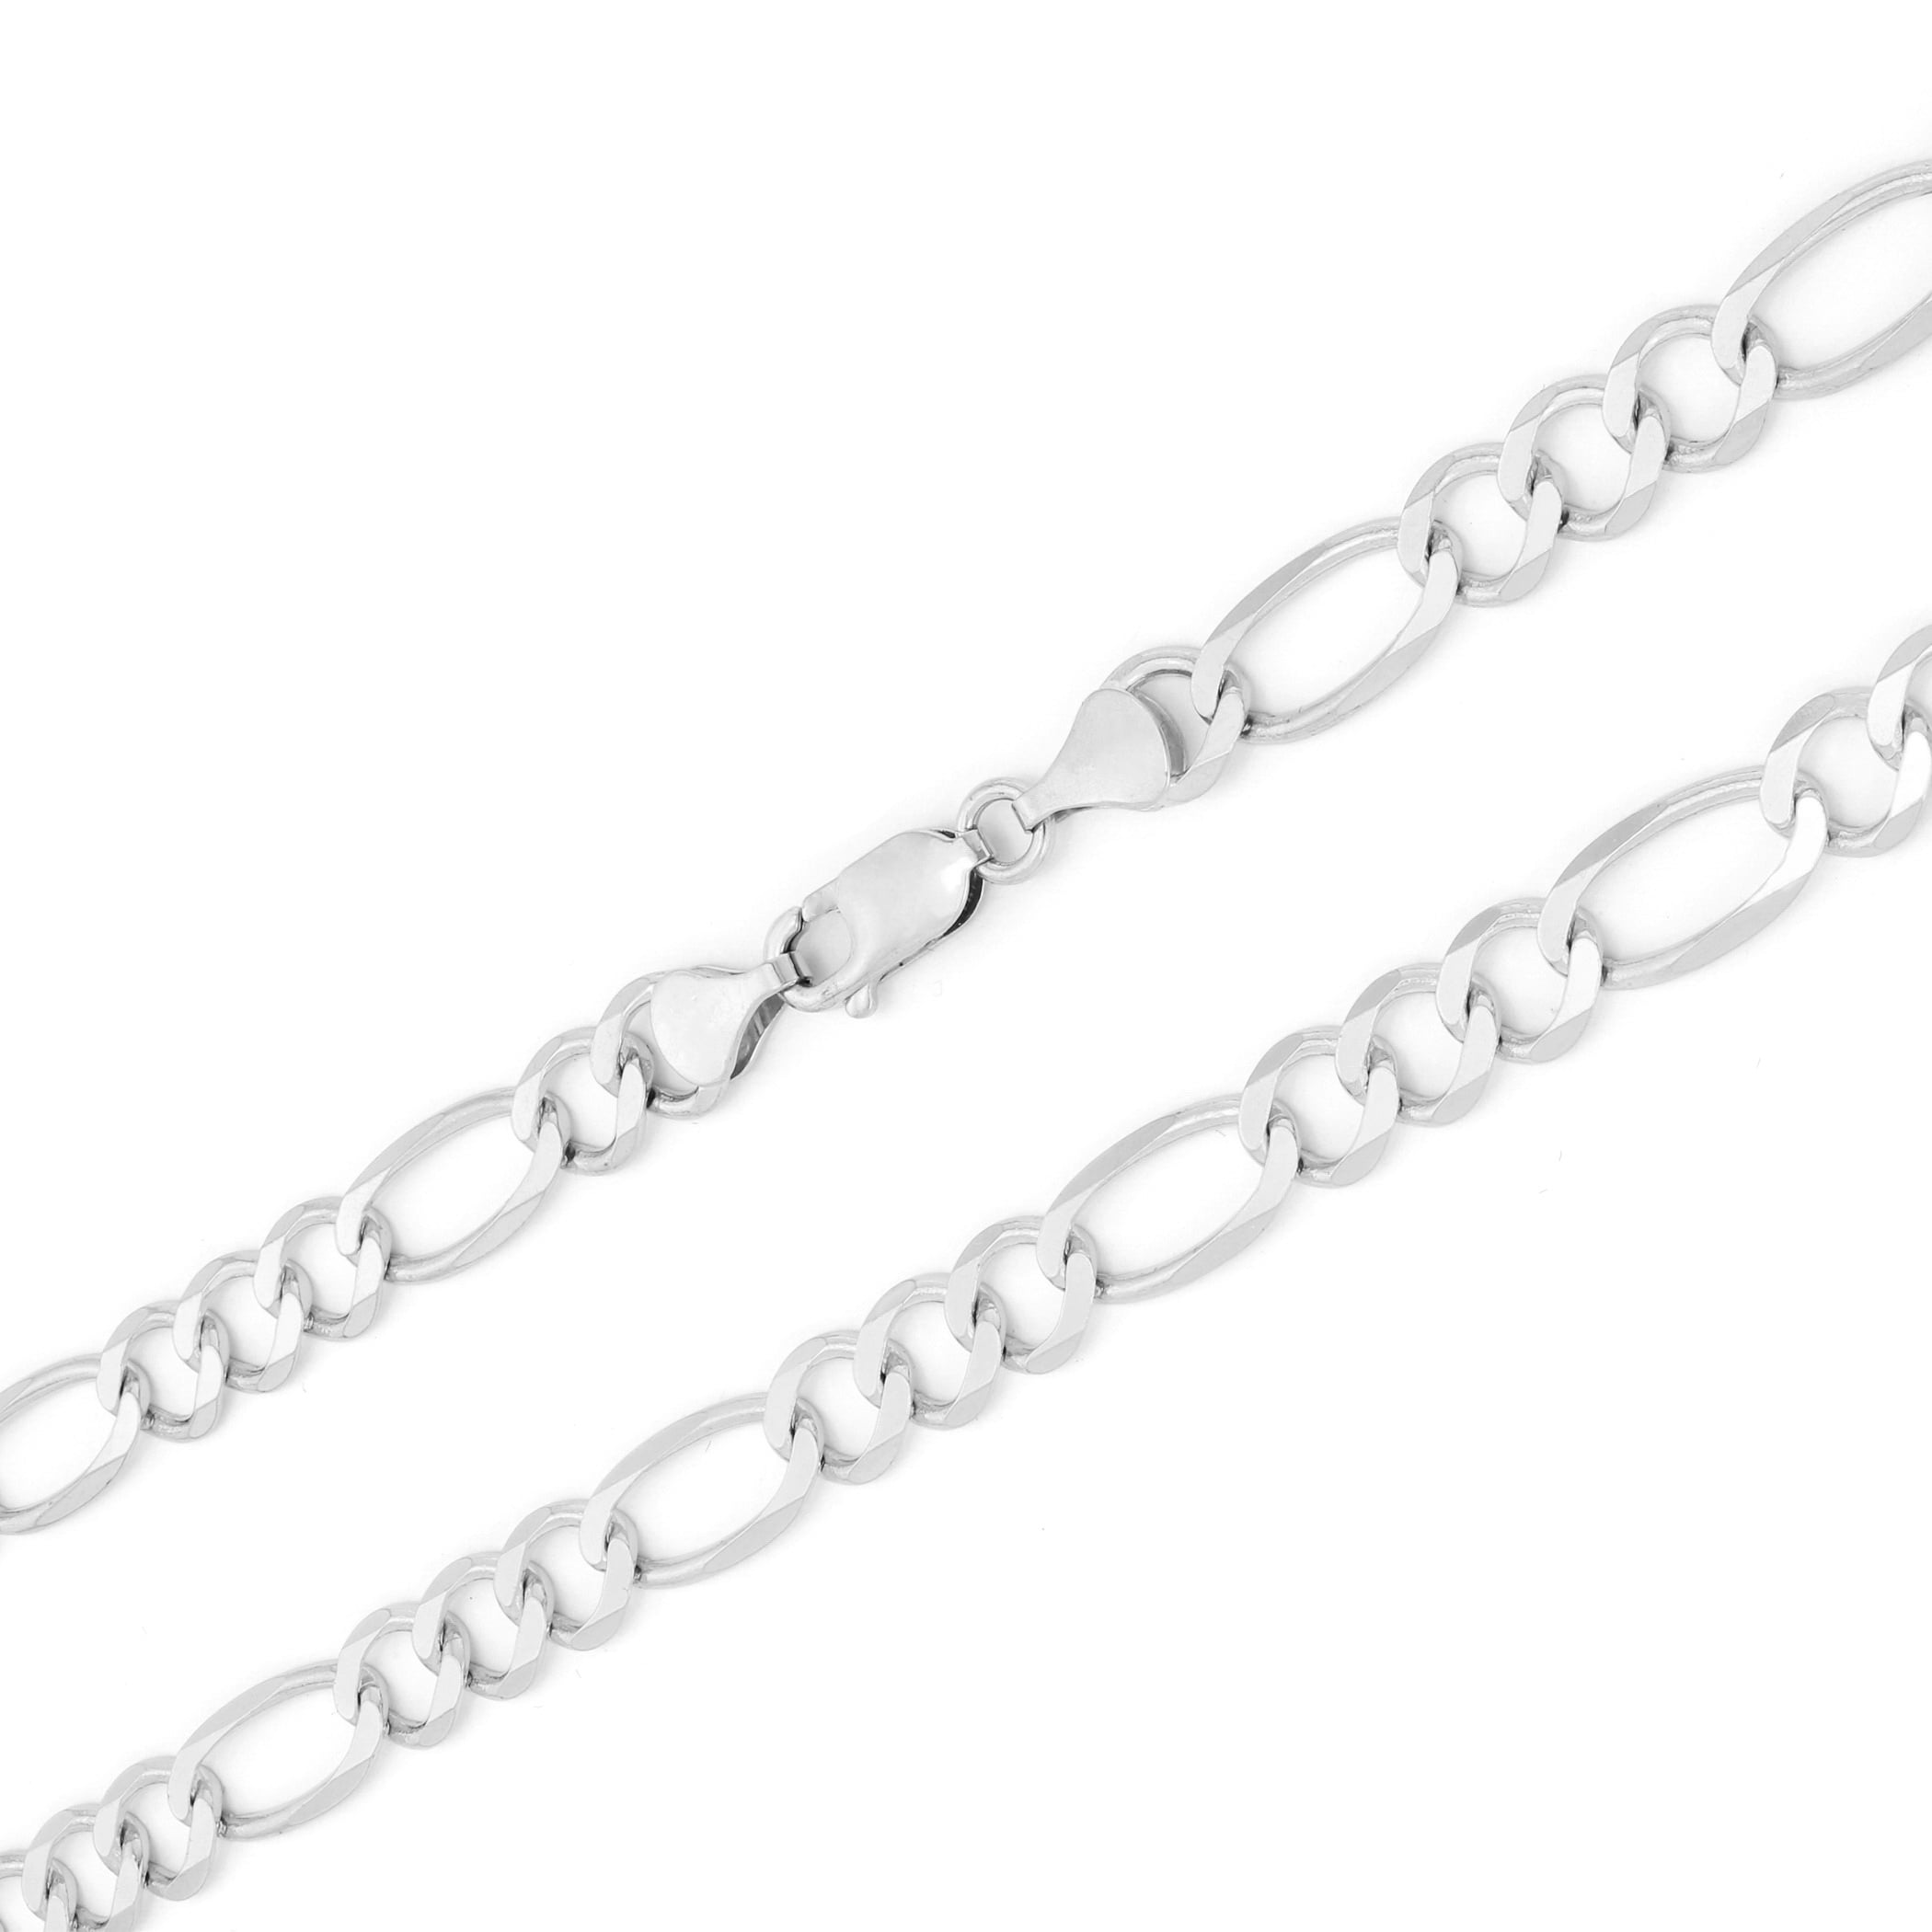 Real 14K White Gold Solid 2.5mm Italian Figaro Link Chain Pendant Necklace 20" 